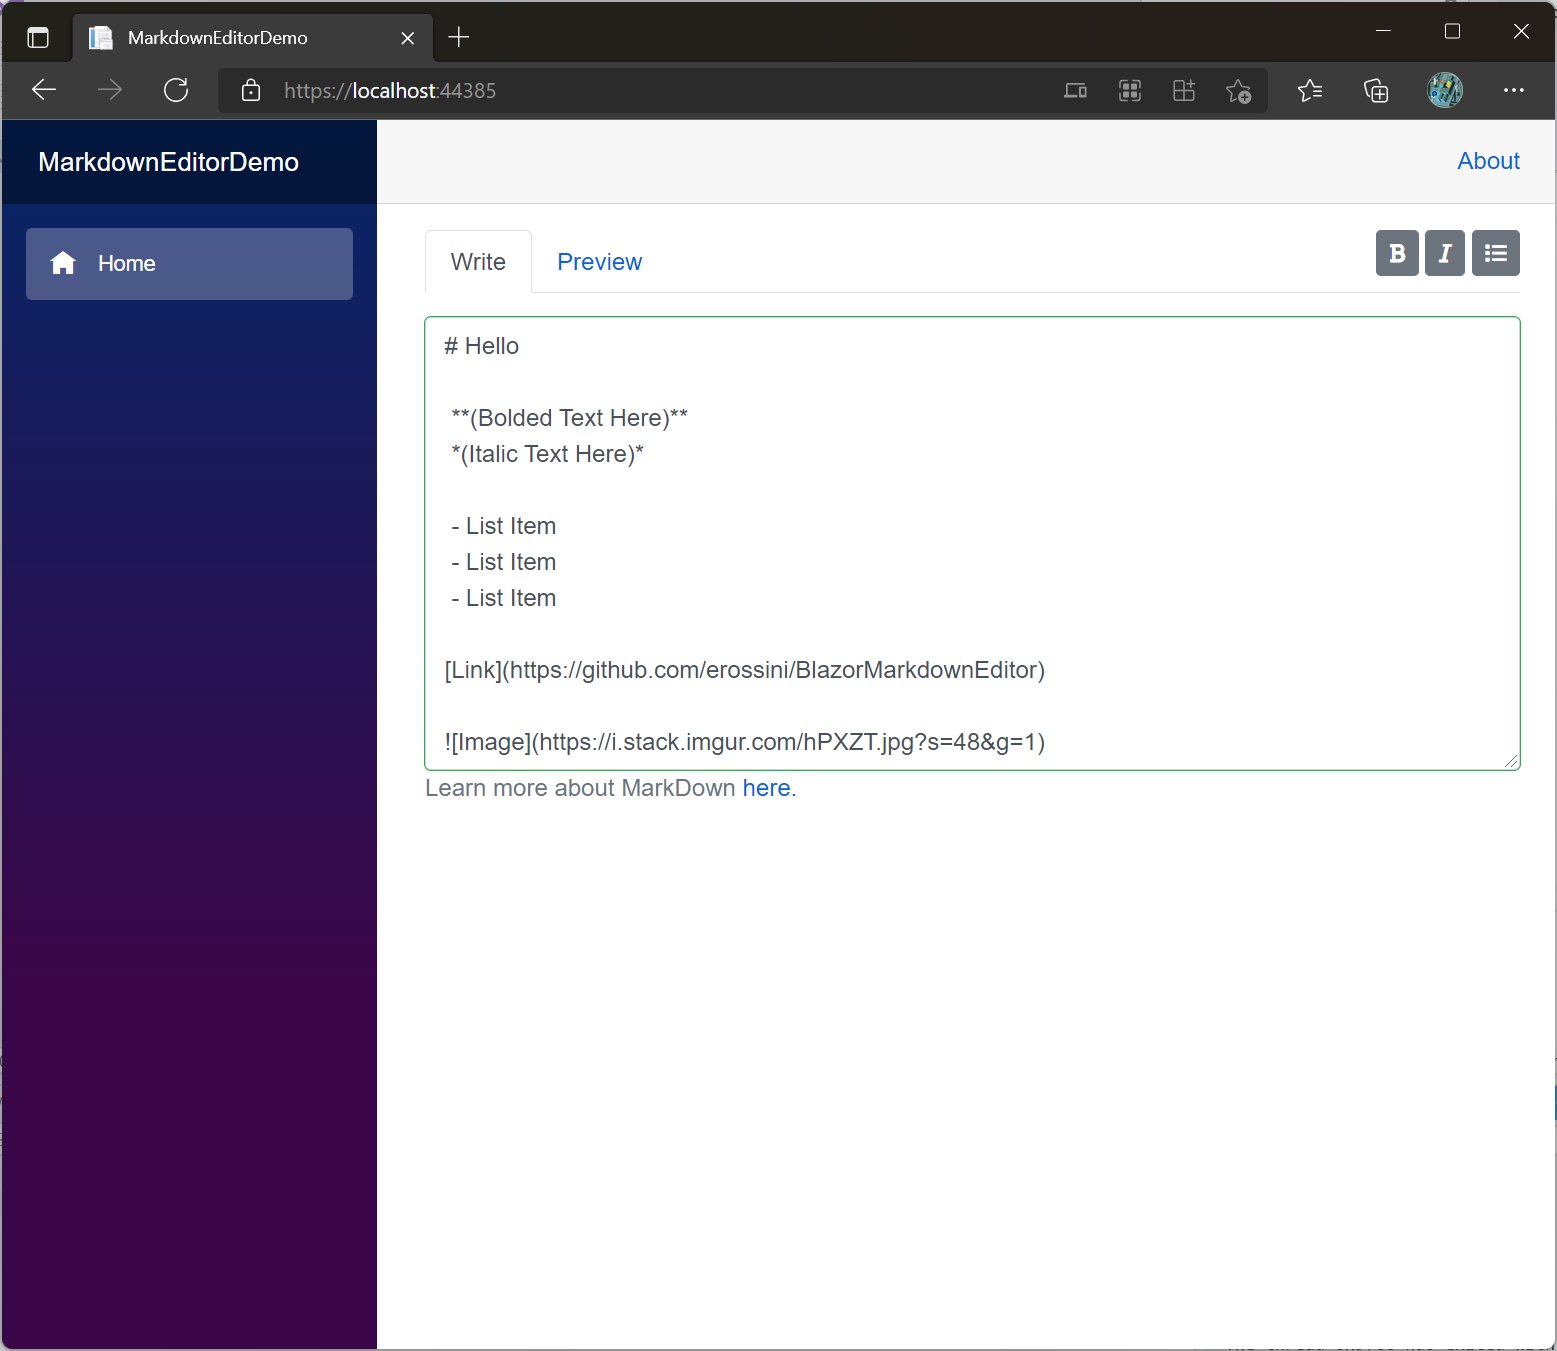 Write your Markdown text - Markdown editor with Blazor